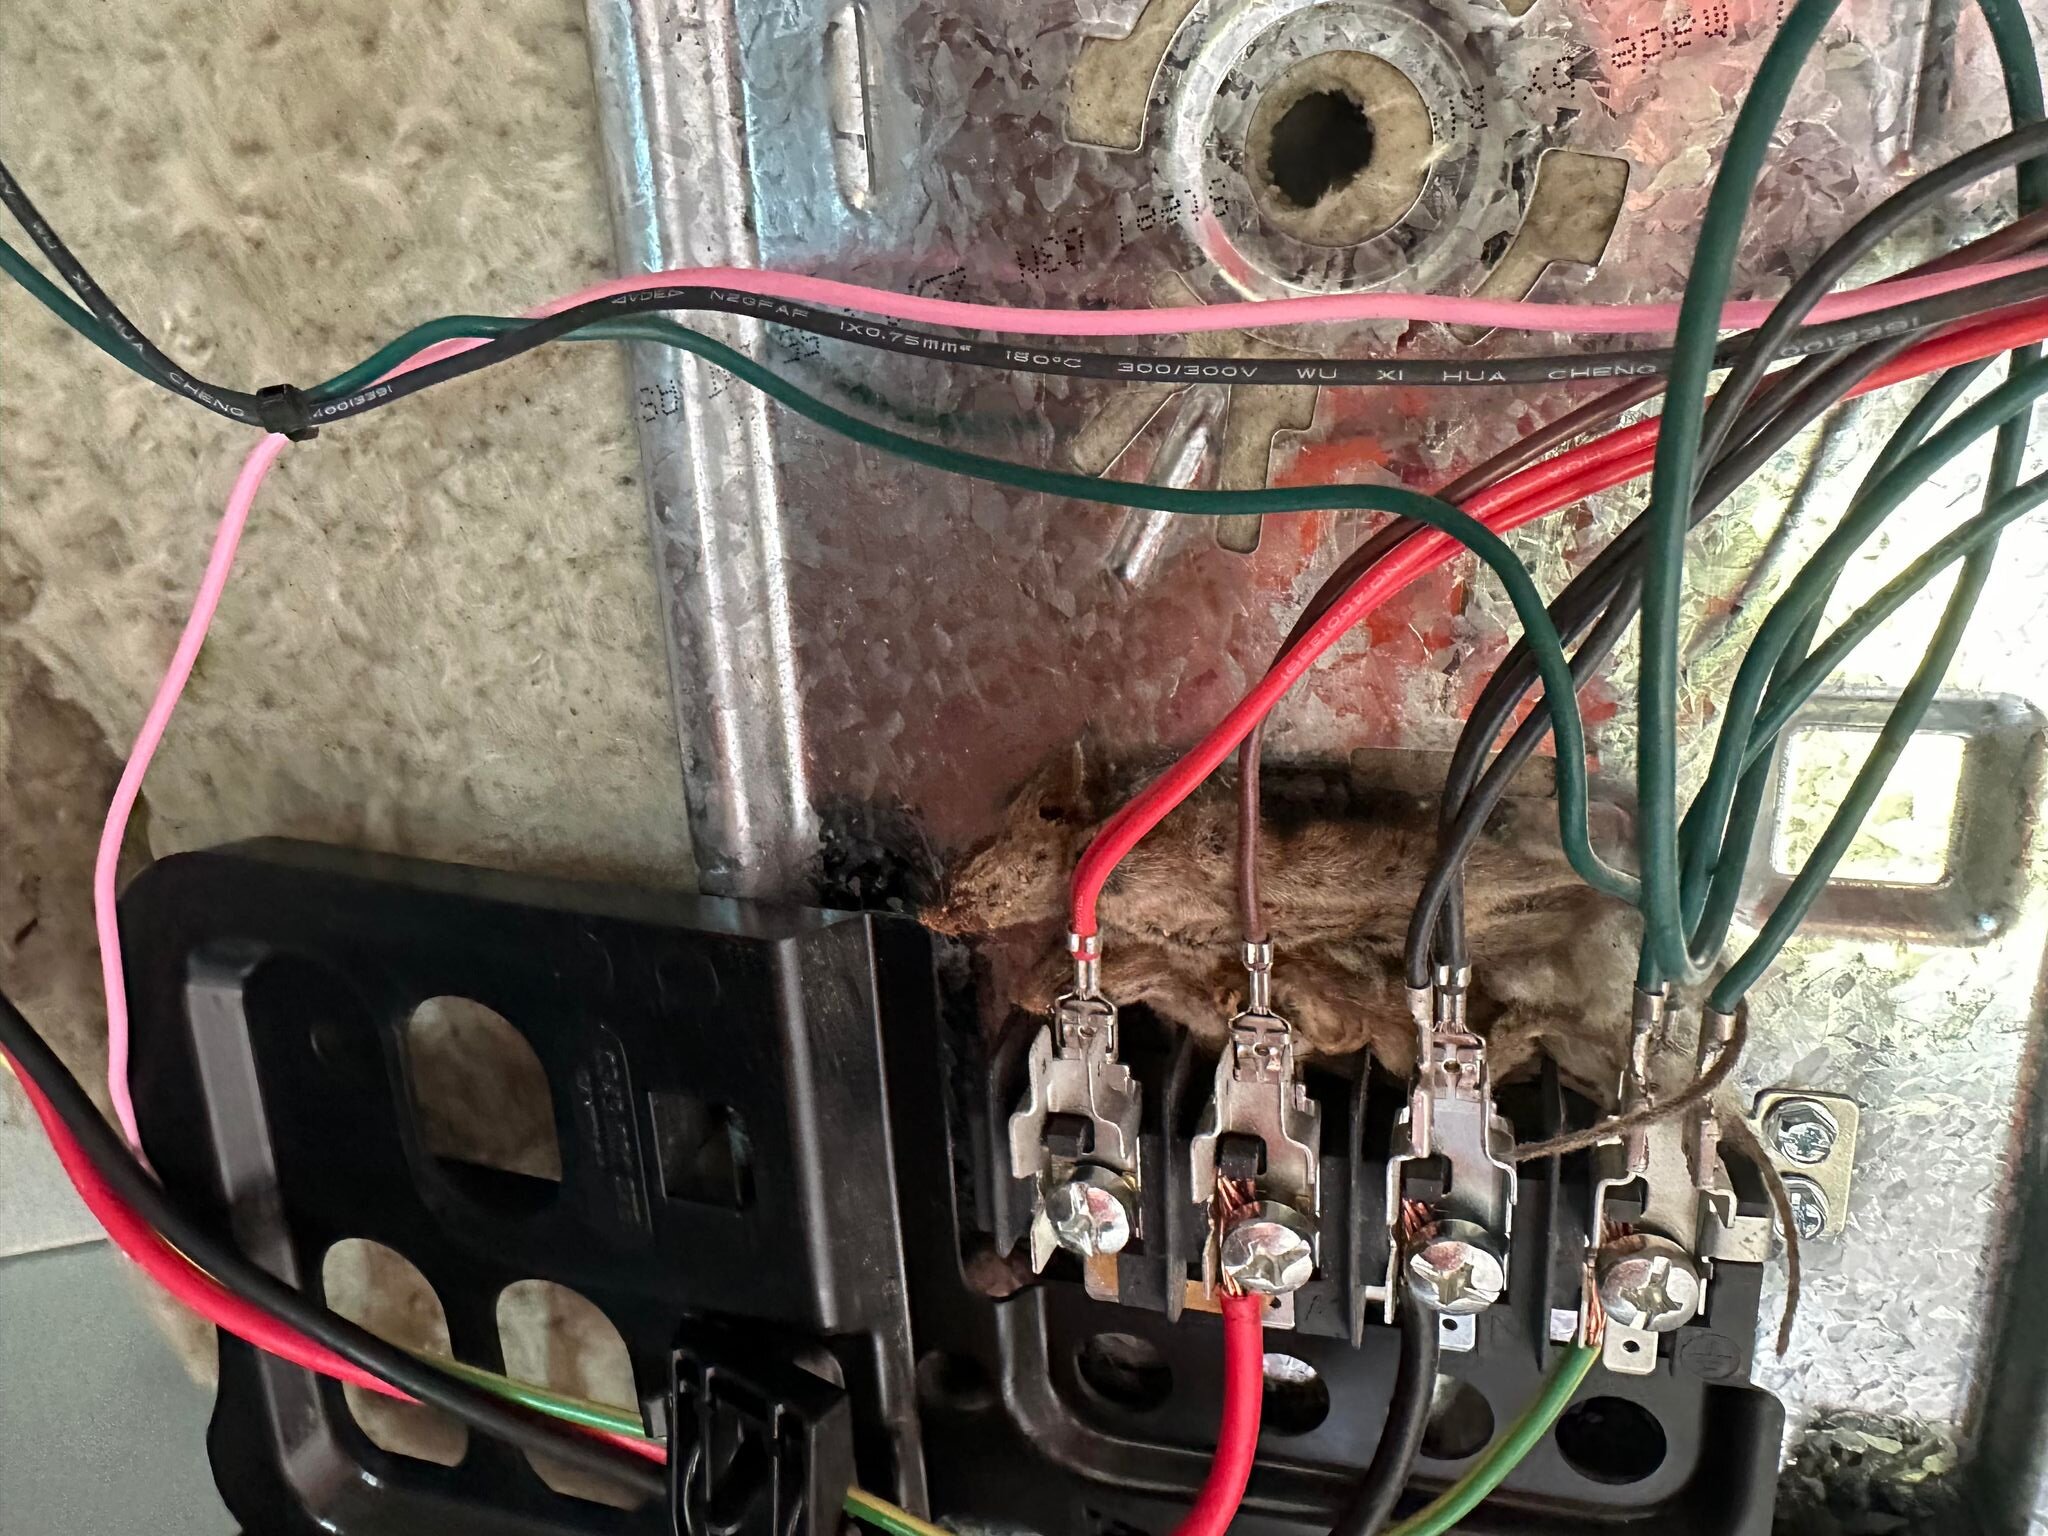 A routine disconnect turned out to be a bit of a pest!
#electrician #switchboard #mousetrap #surprise #whatsthatsmell